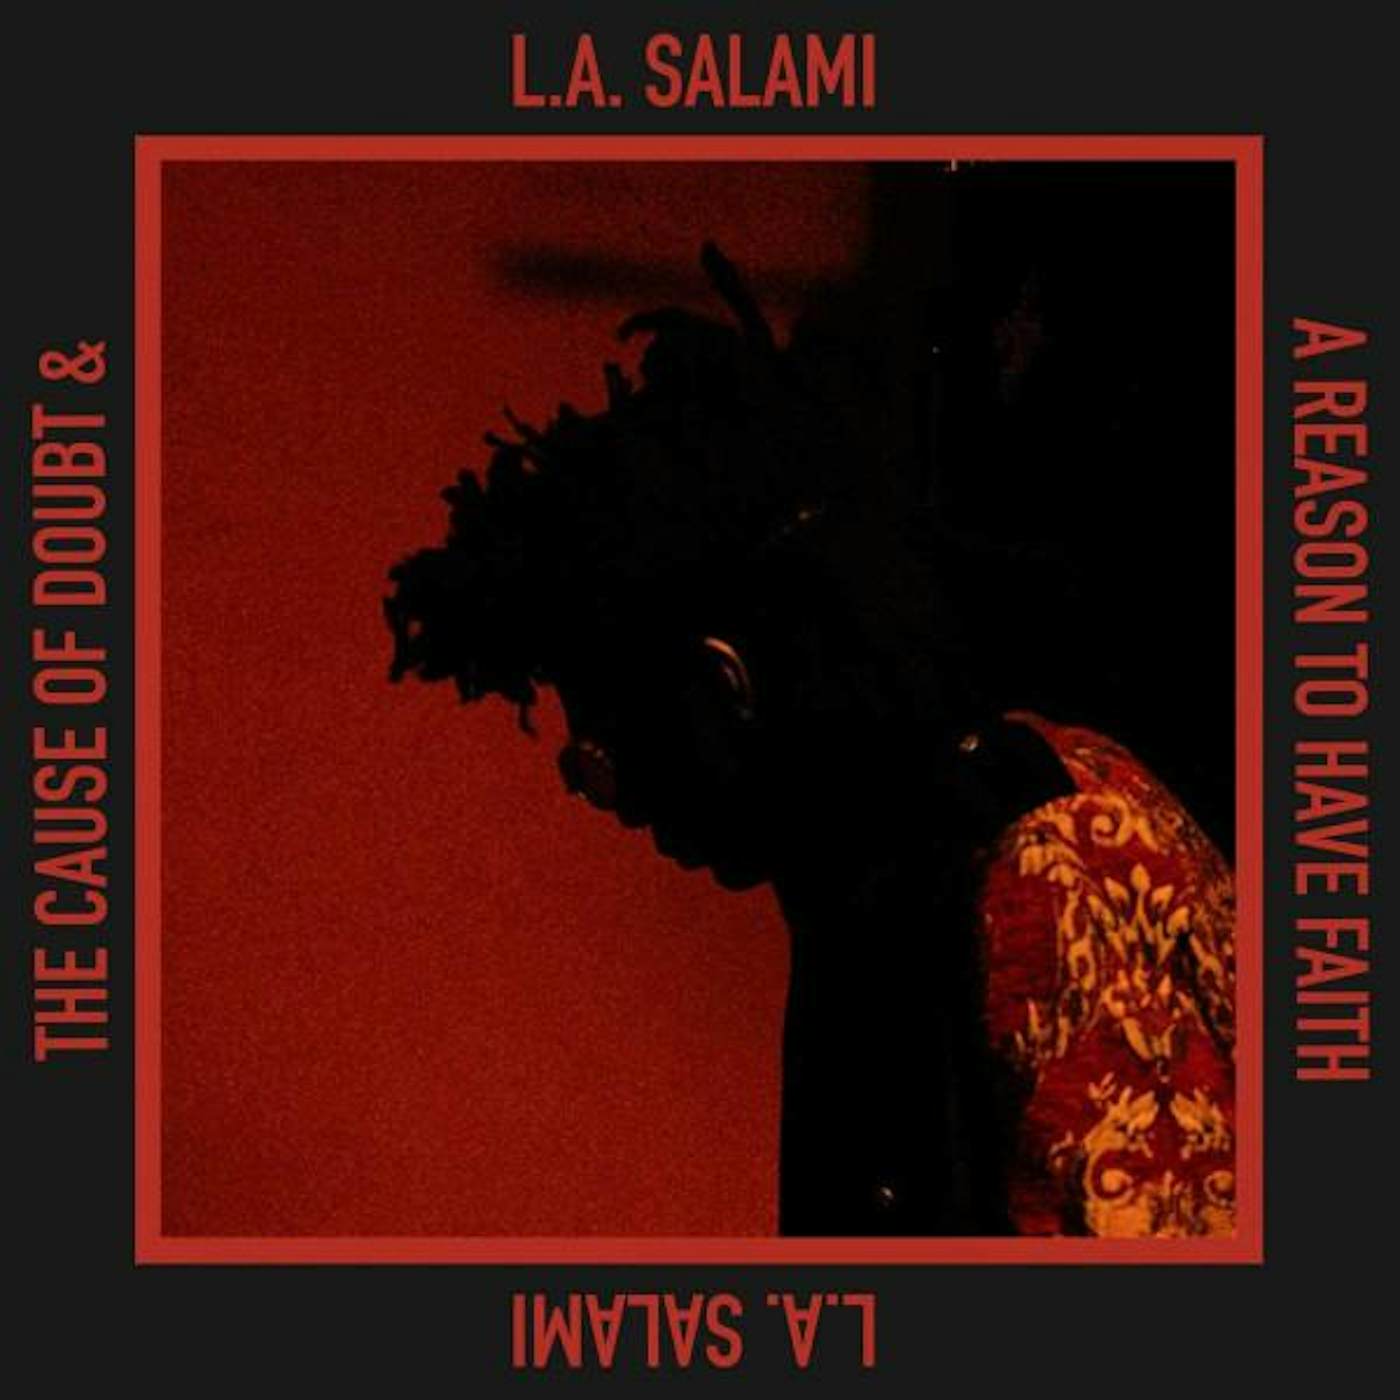 L.A. Salami CAUSE OF DOUBT & A REASON TO HAVE FAITH CD